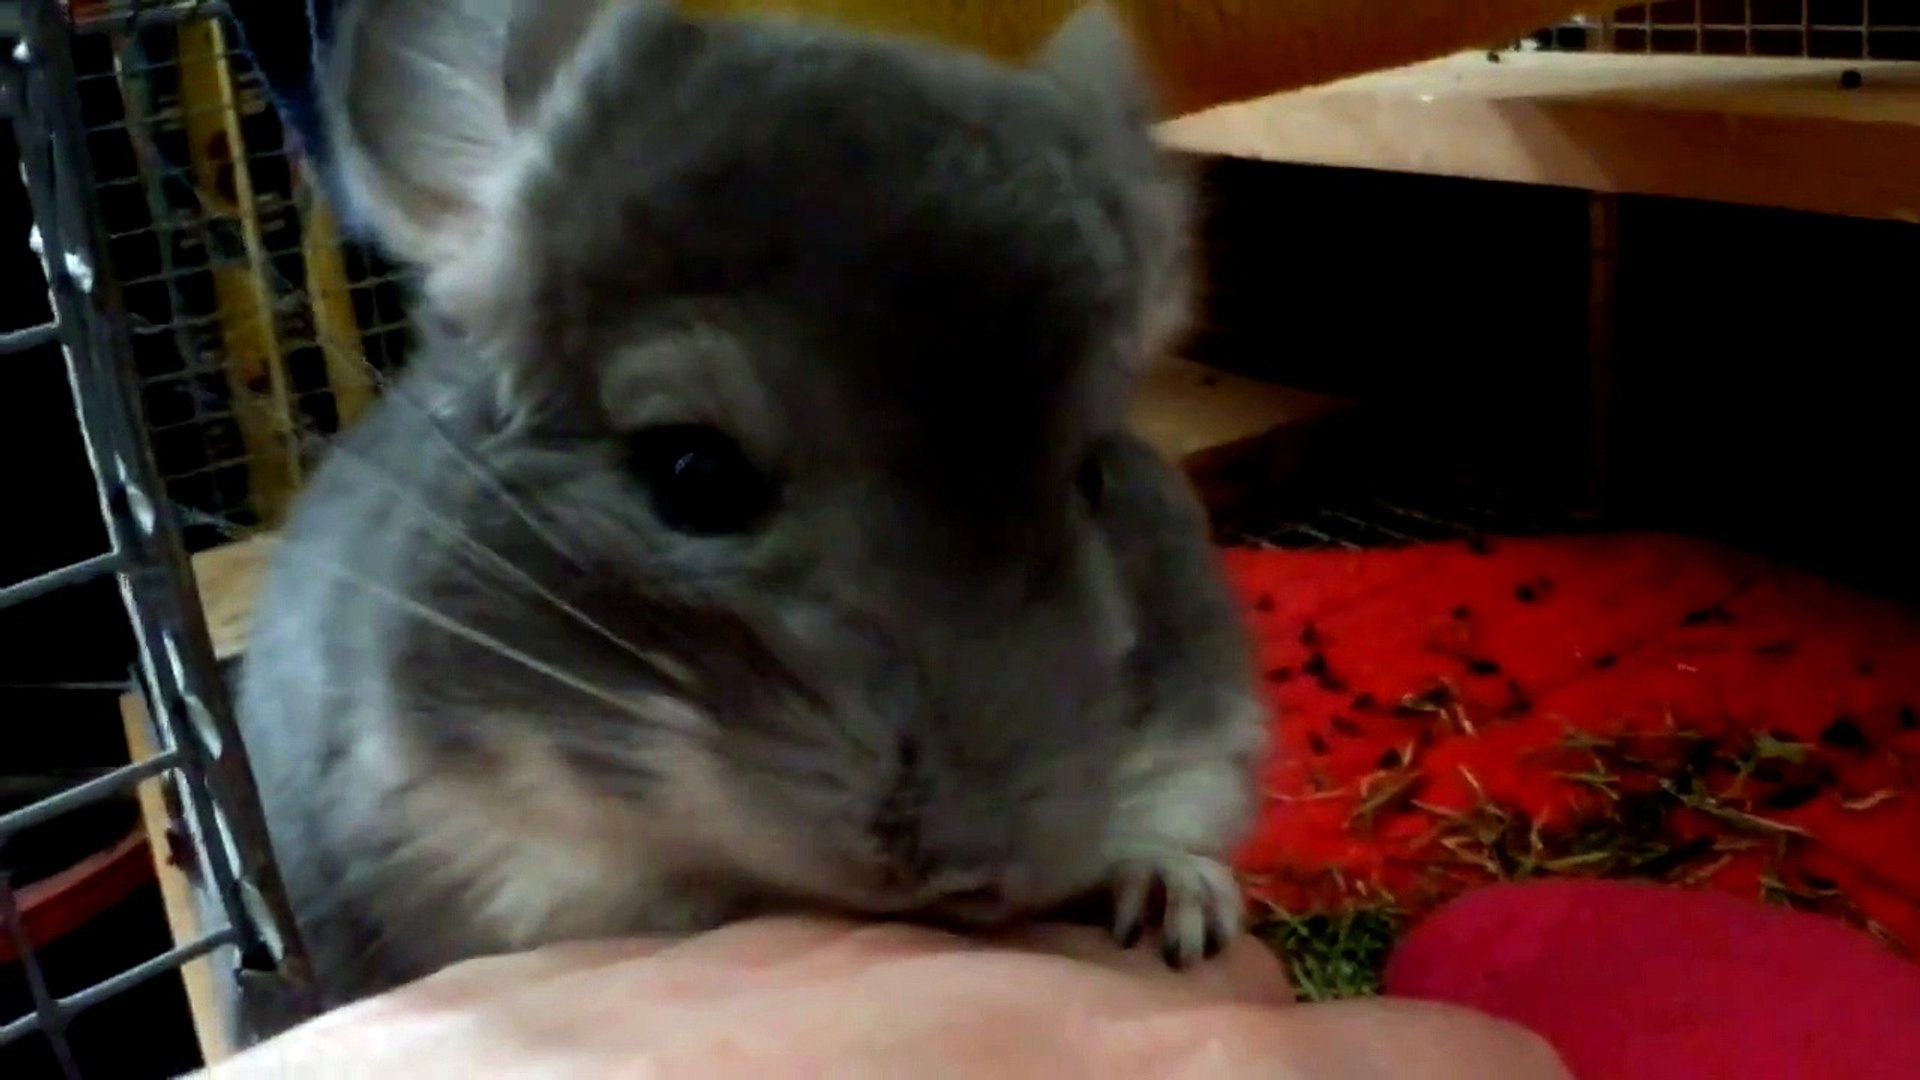 Chinchilla Myrthe at 4 months learning to groom gently